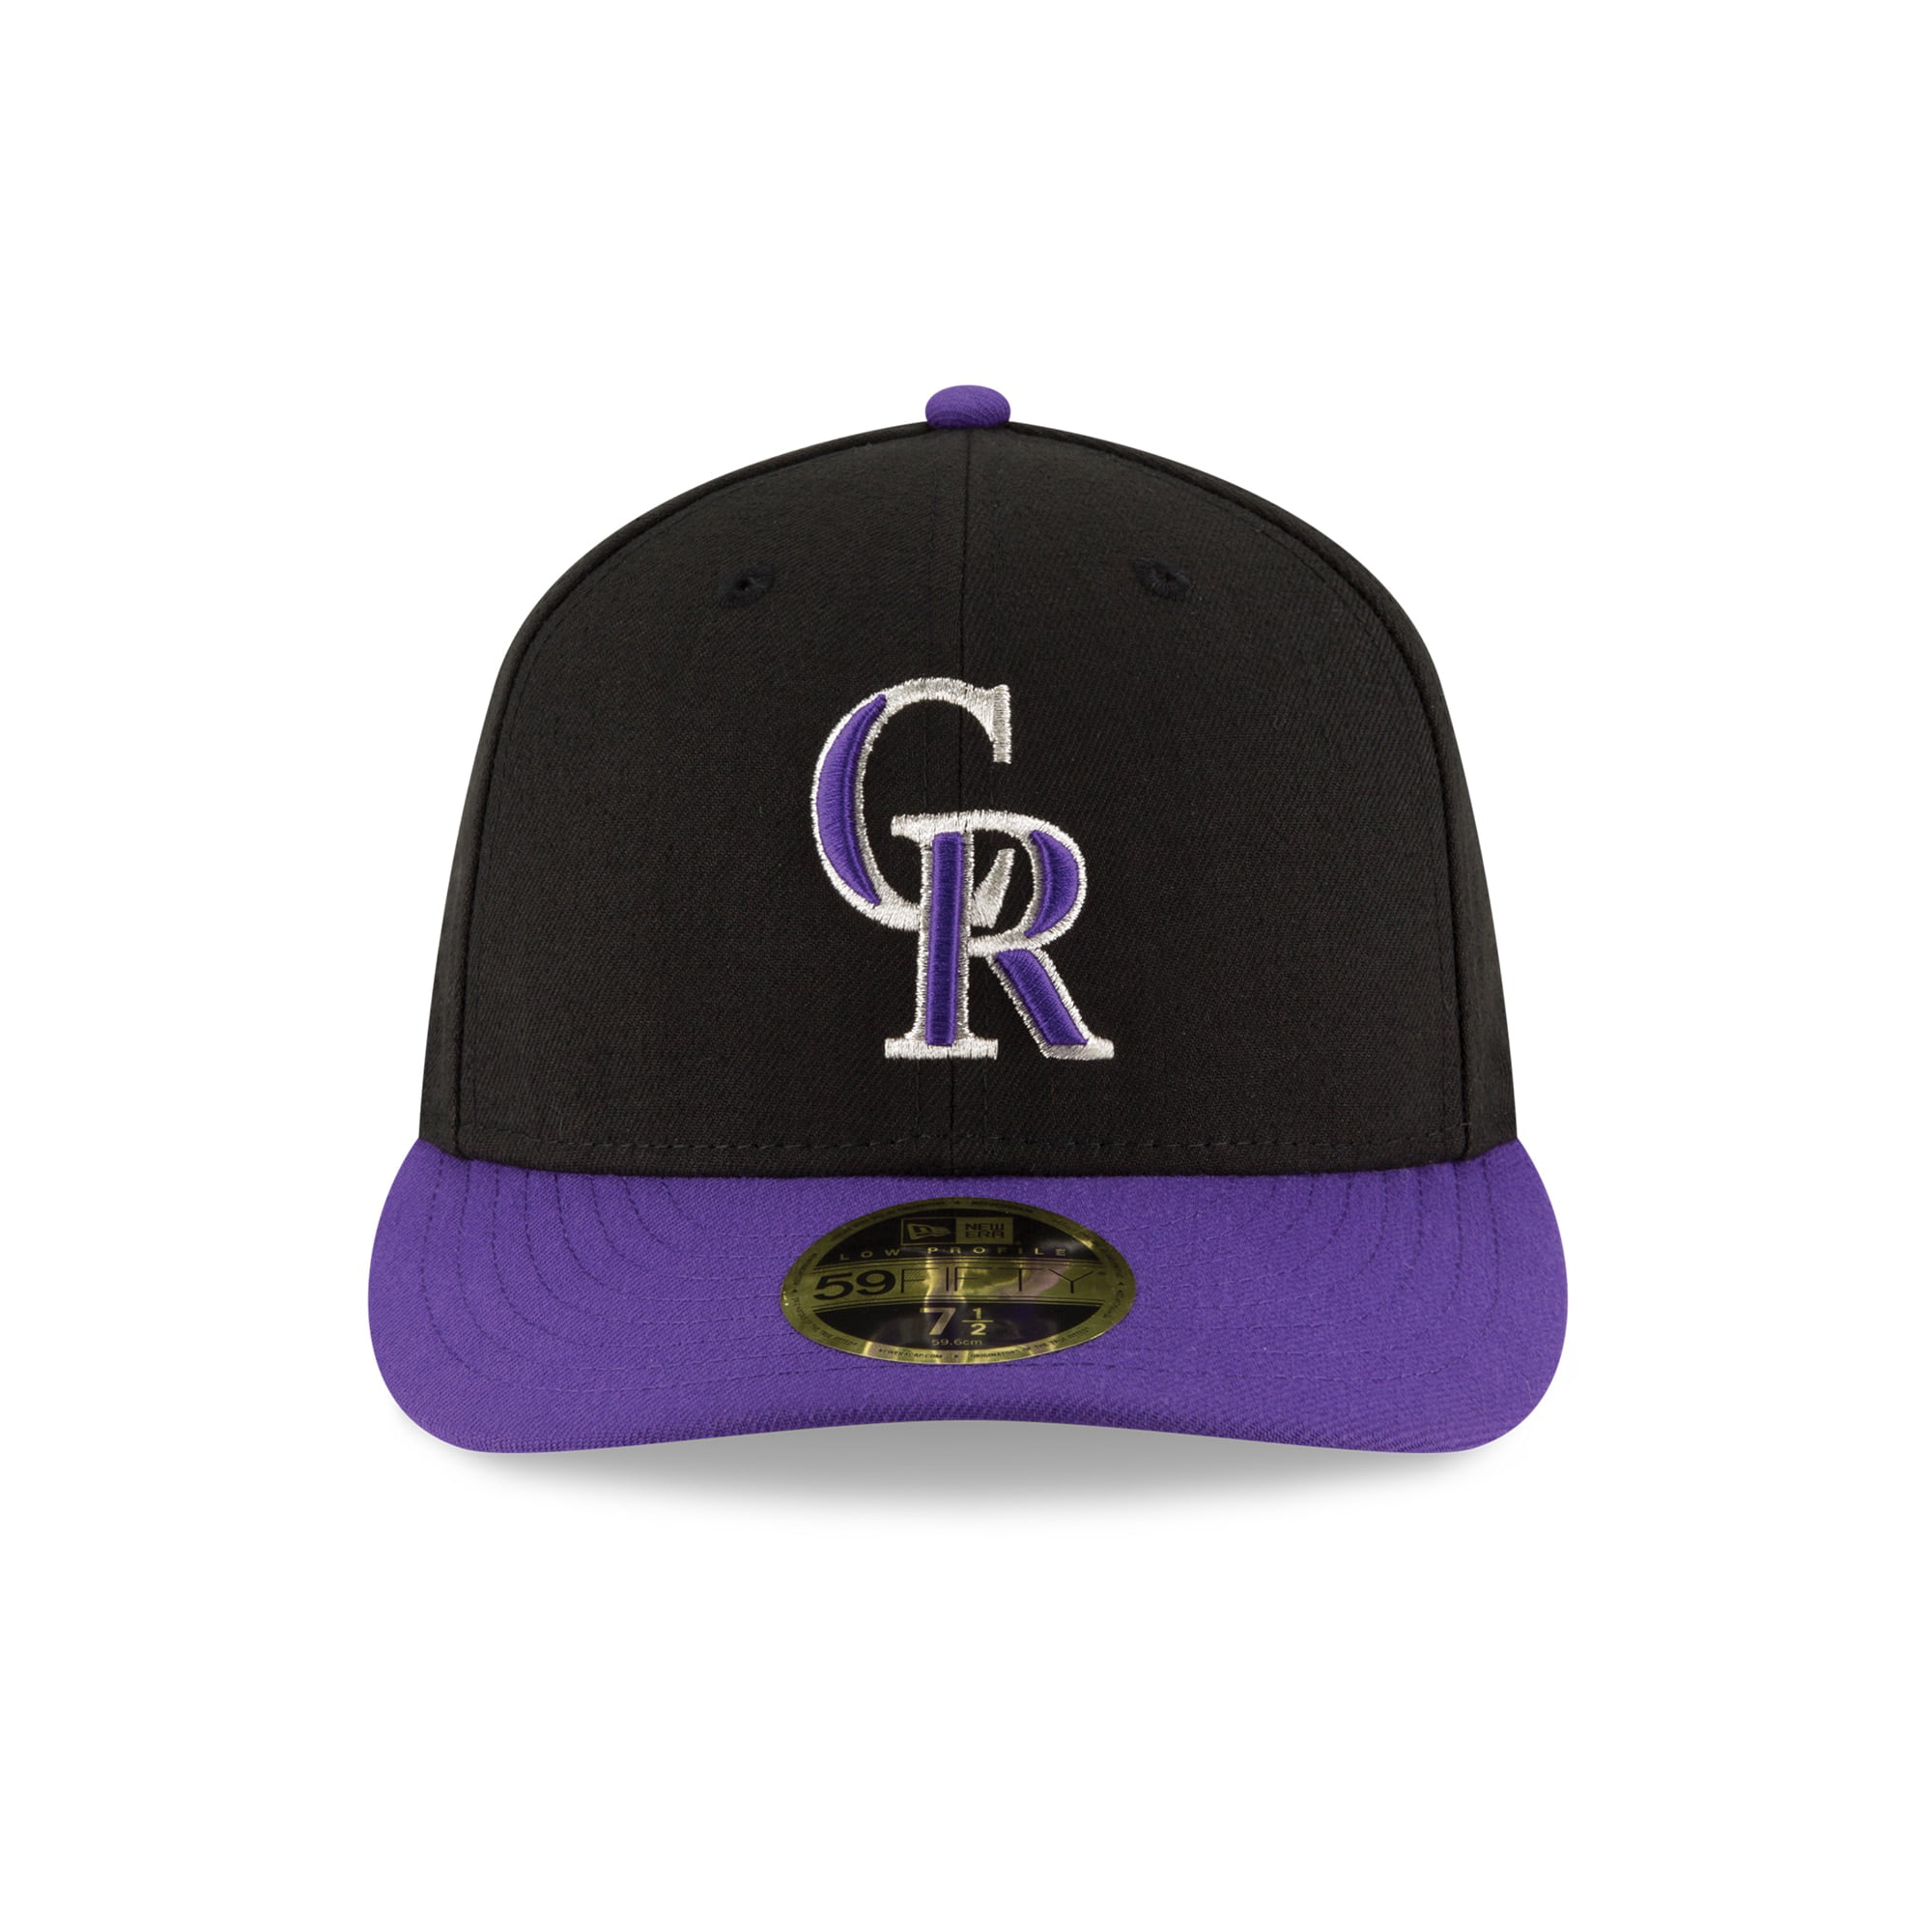 New Era Colorado Rockies 59FIFTY Black on Black Fitted Hat